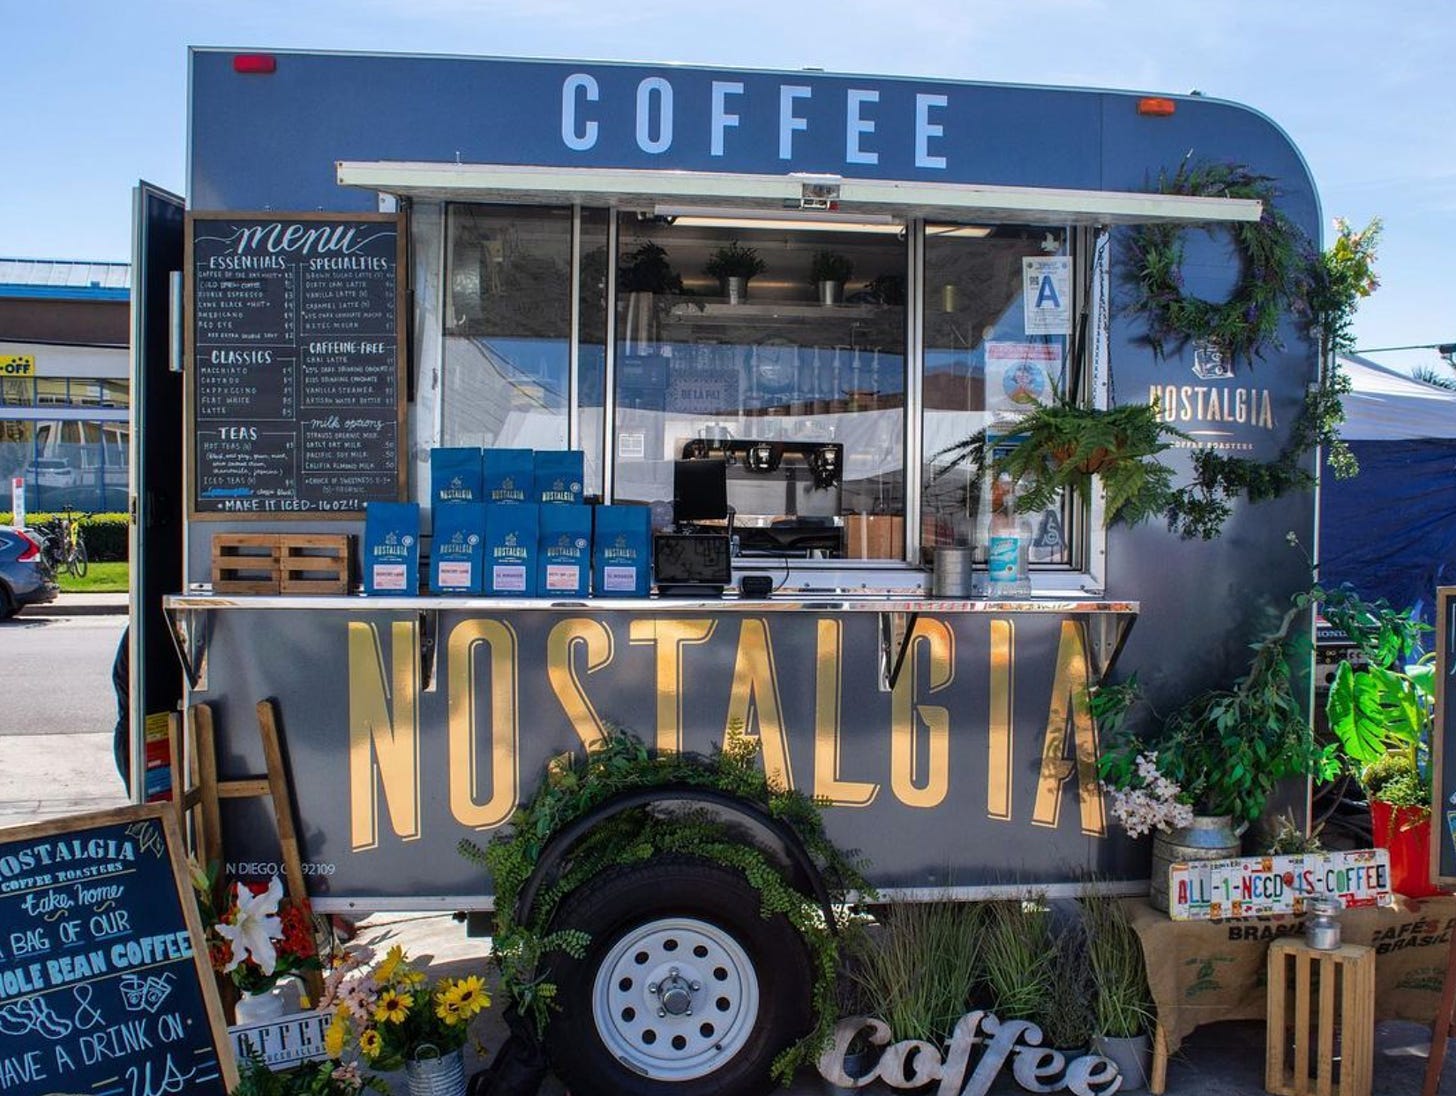 A coffee shop built into a pull-behind trailer. Photo is of the shop set up on the side of the road with blue coffee bags on the drop down counter, a chalboard menu mounted on the door and a slide open, walk-up window looking into the shops coffee bar with espresso machine.